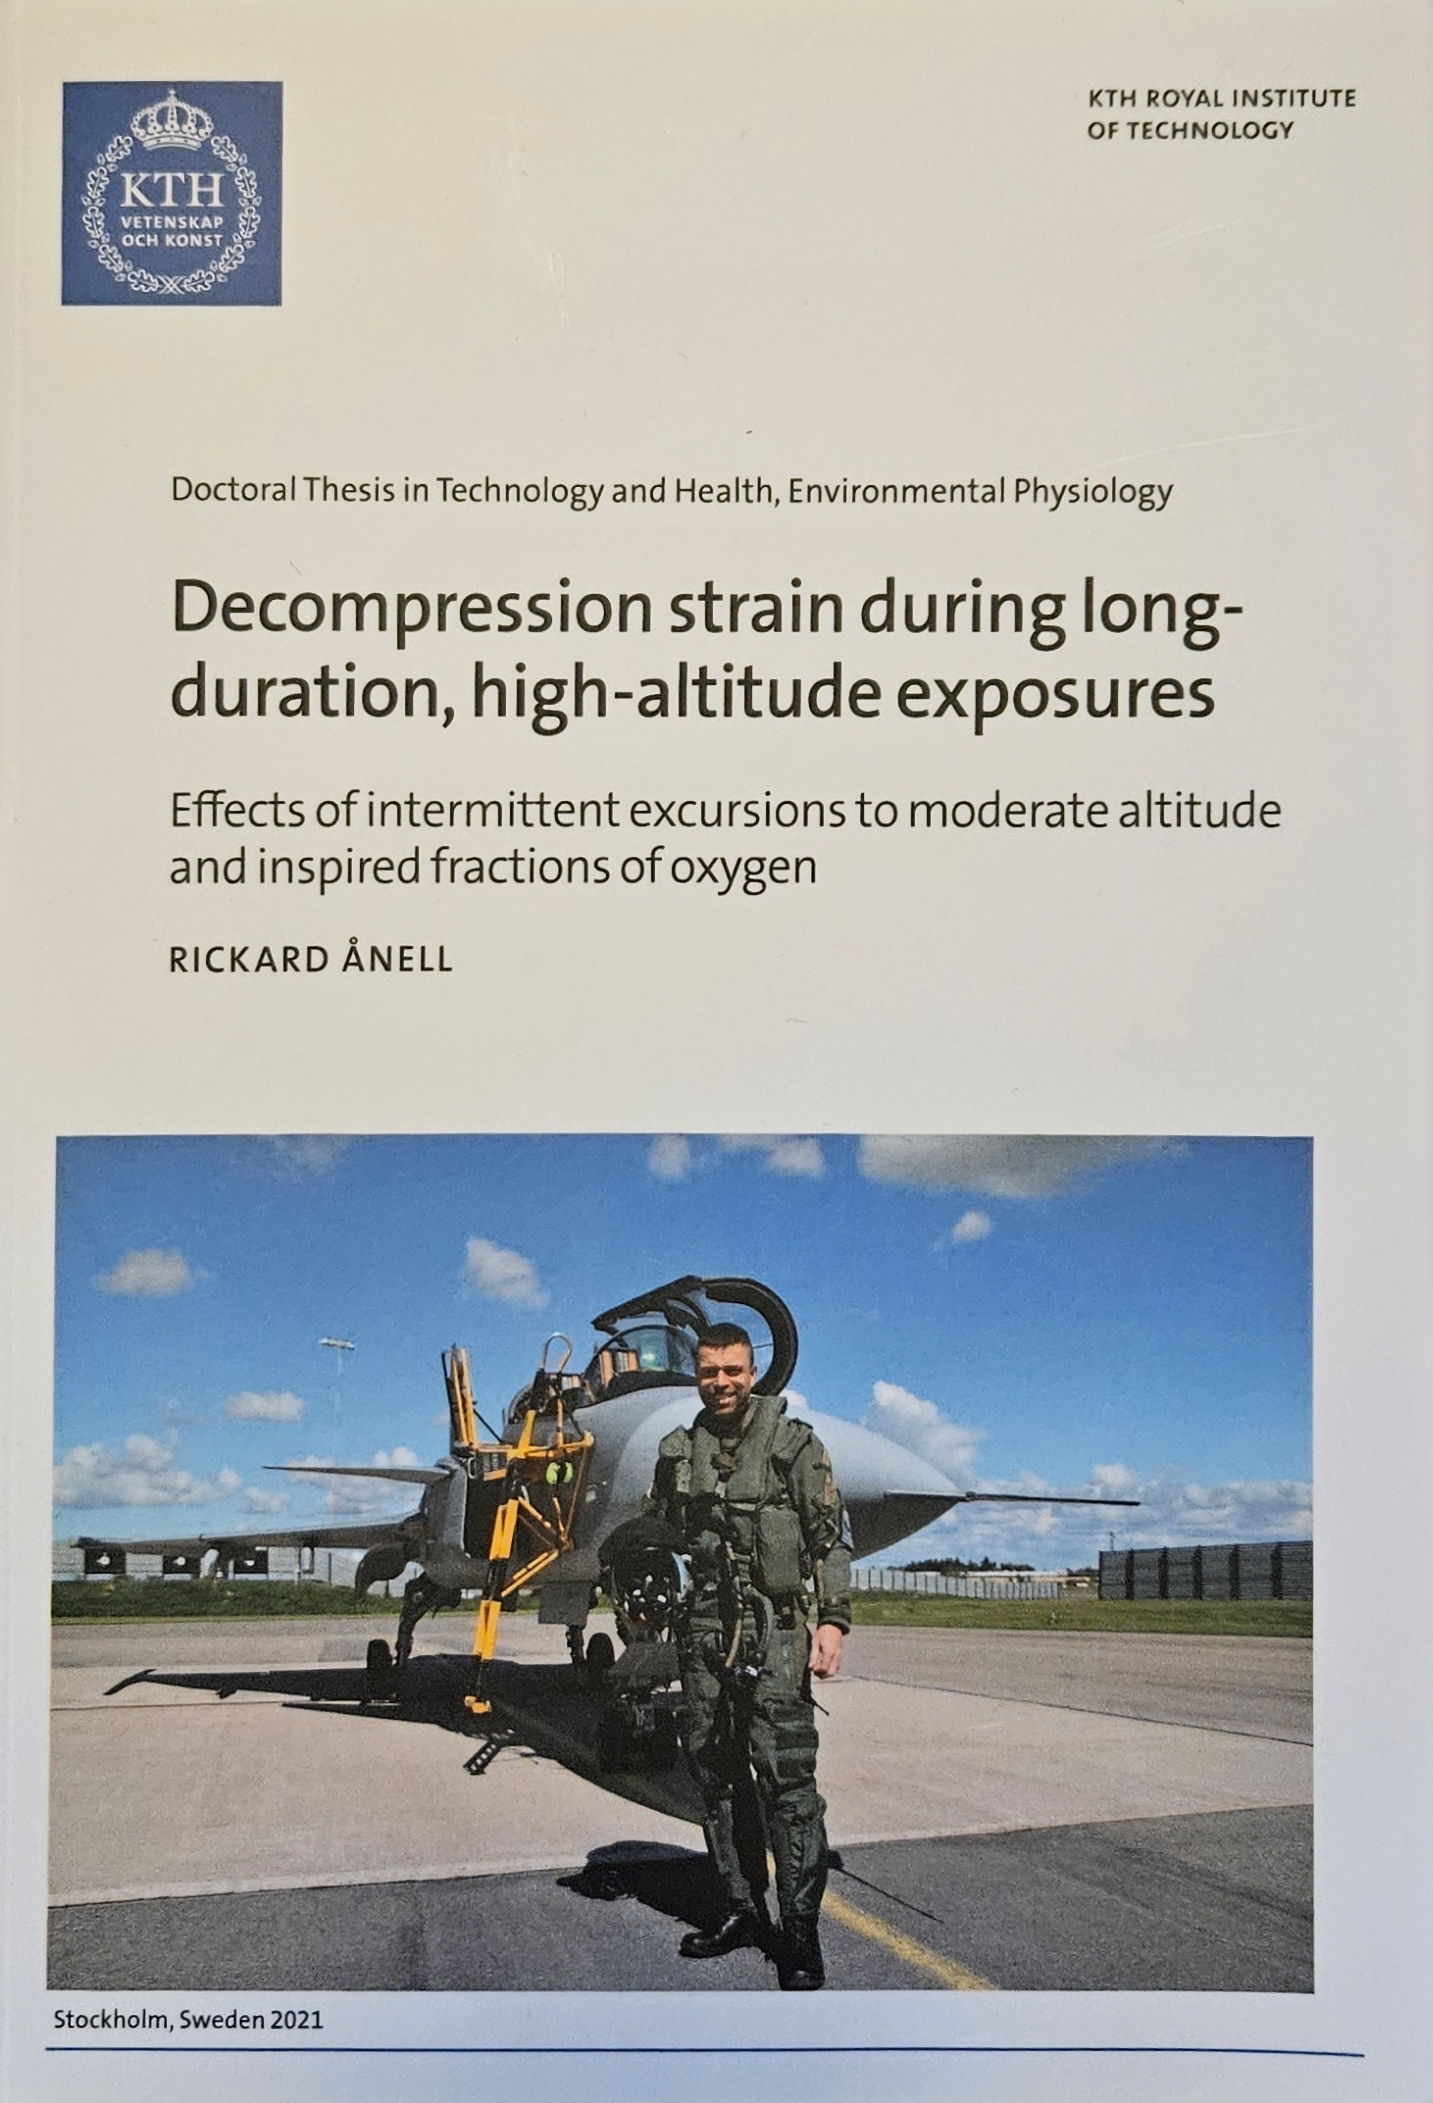 Decompression strain during long-duration high altitude exposers